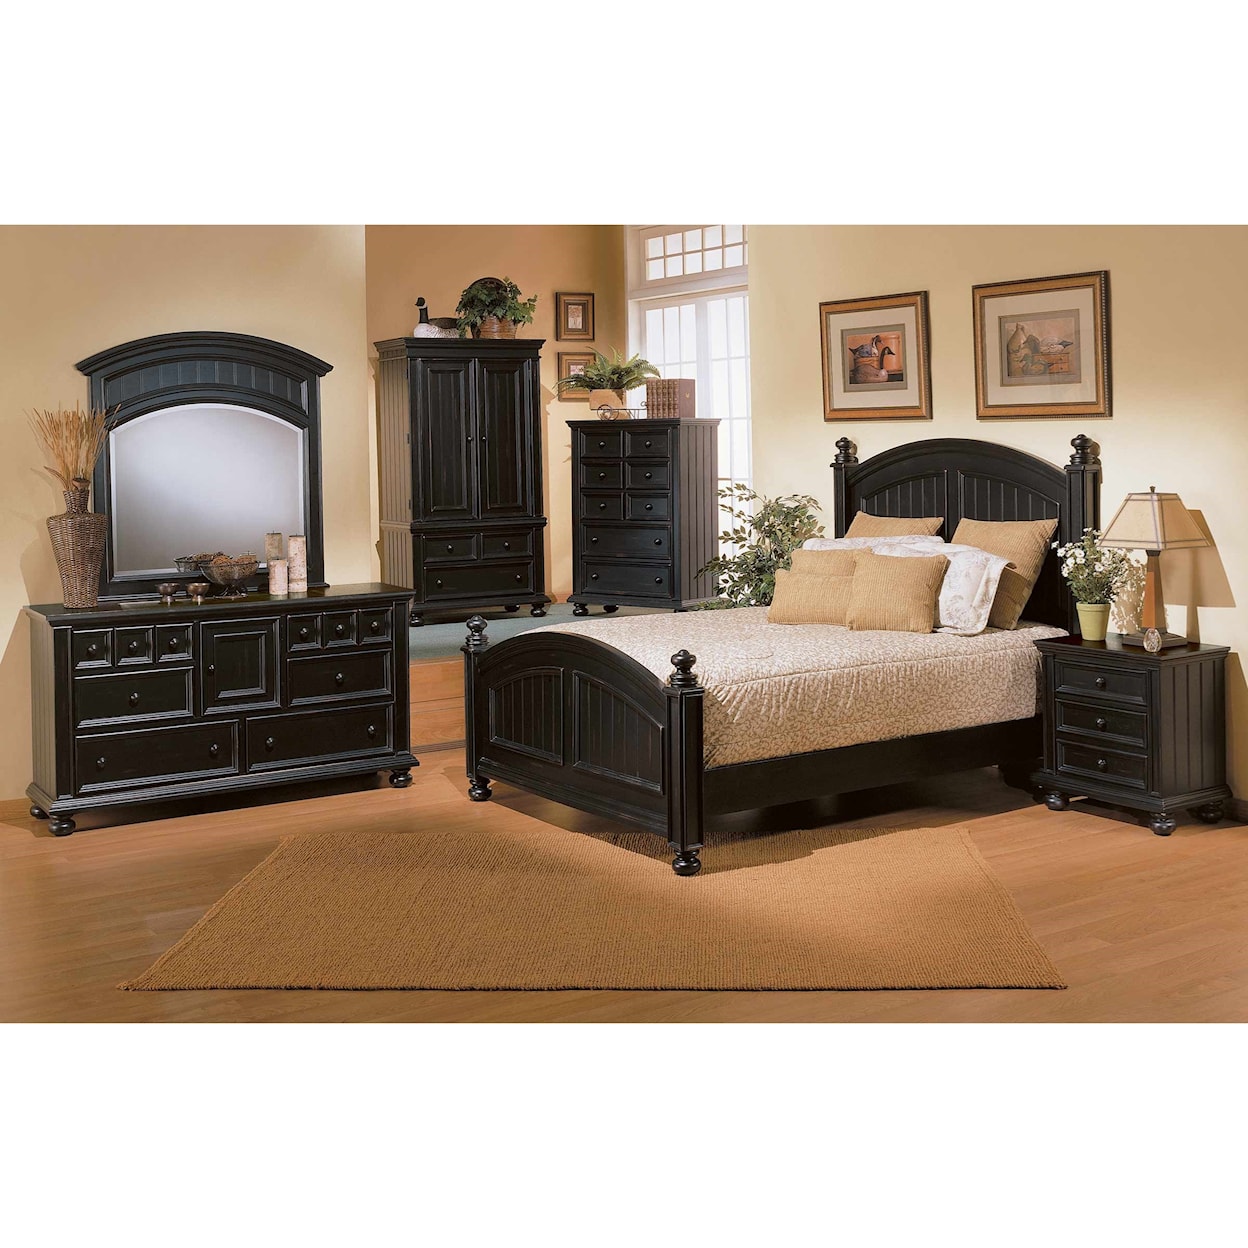 Winners Only Cape Cod  Panel Queen Bed